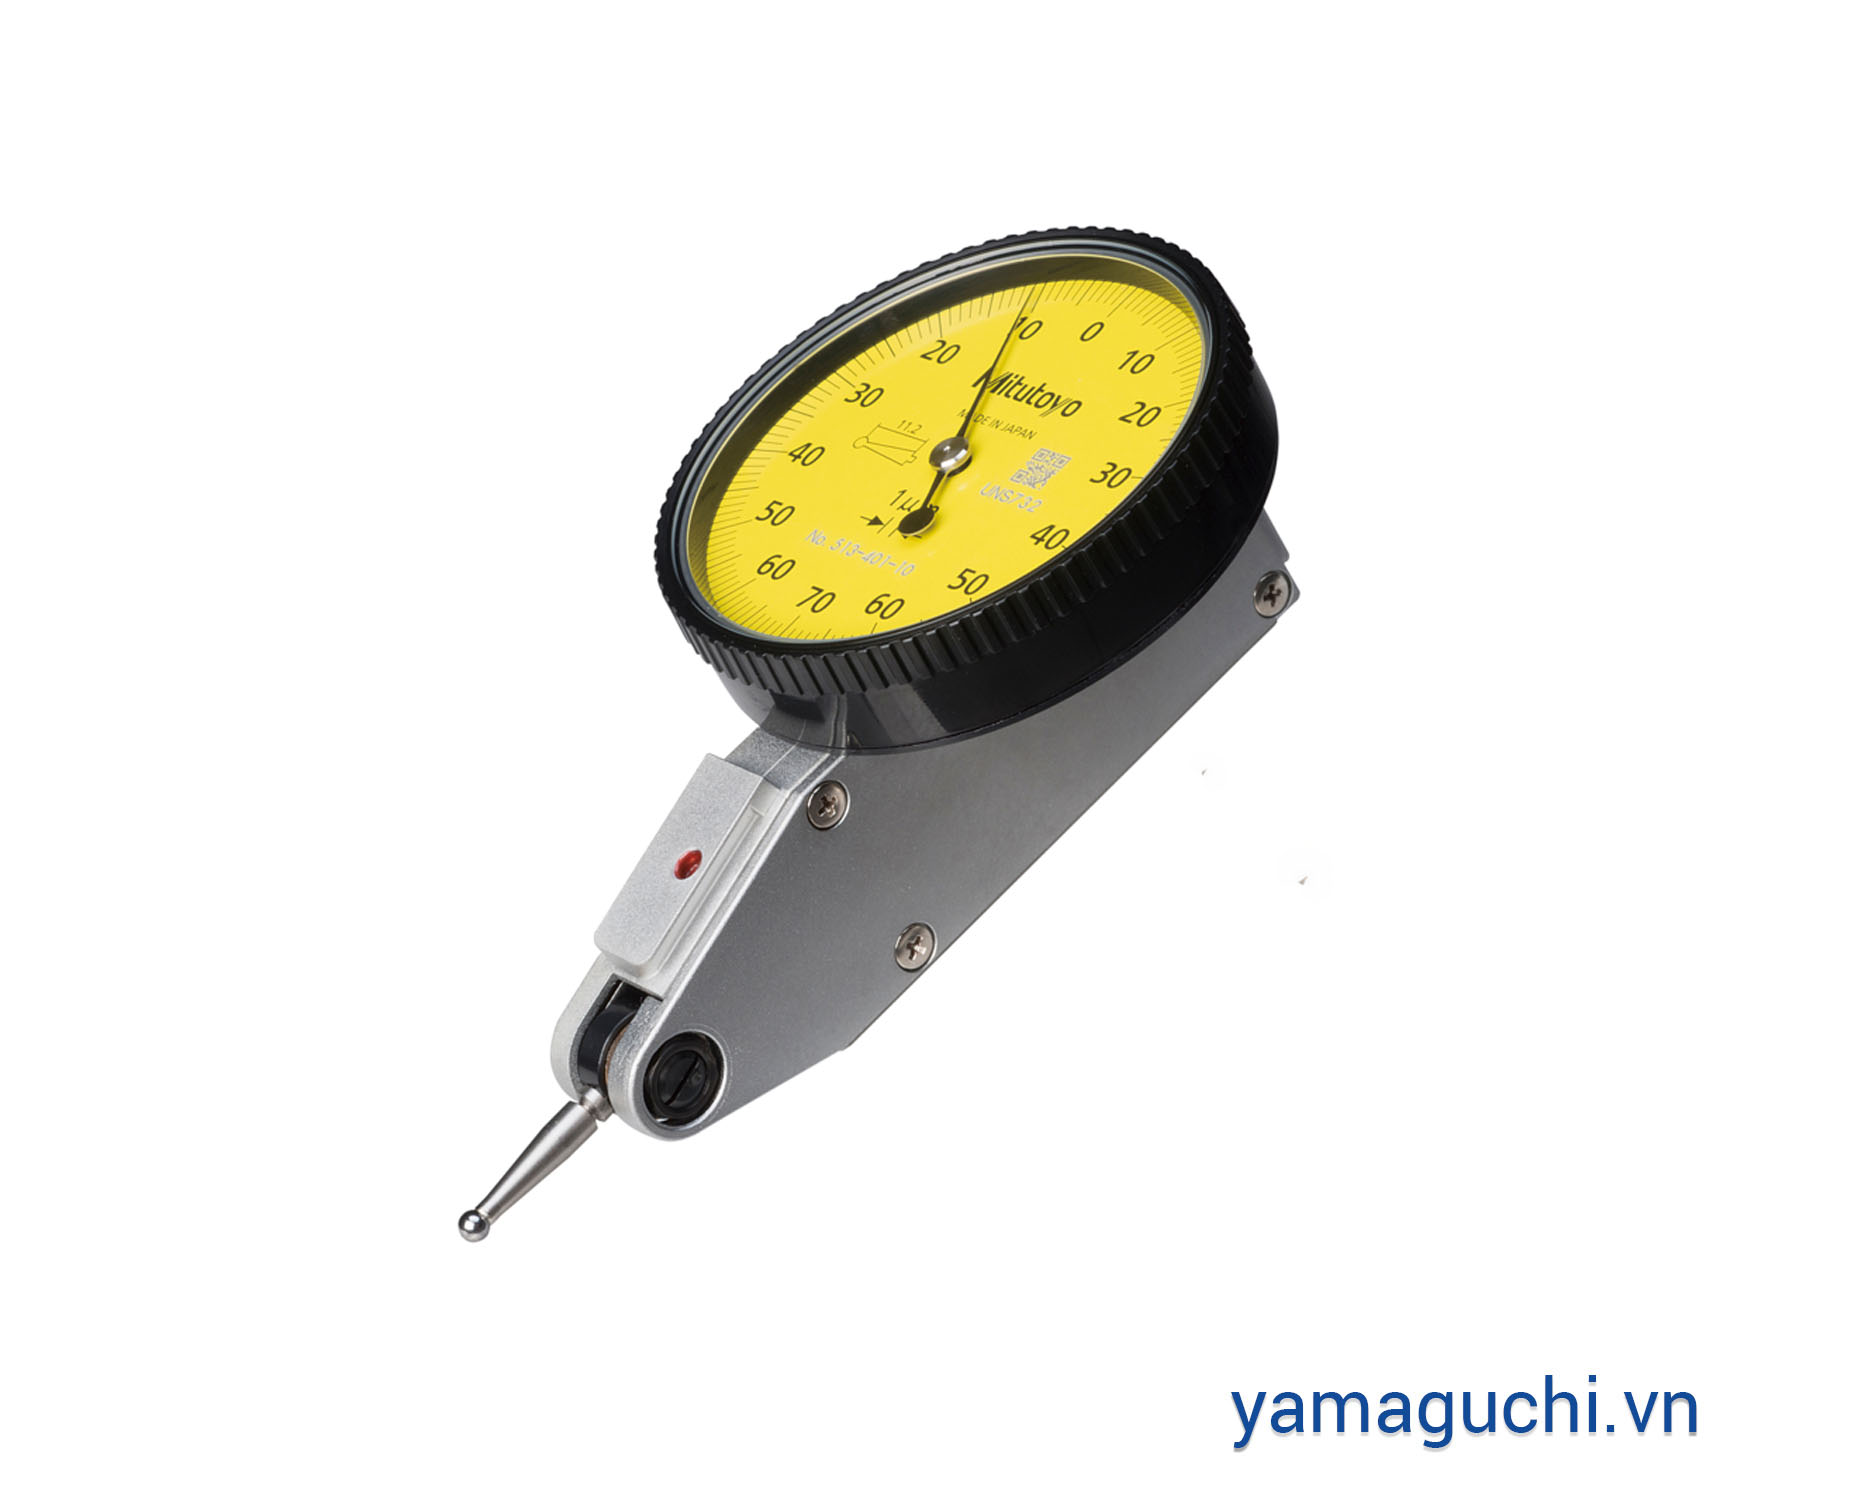 Mitutoyo 0-0.5mm/0.01 dial indicator (513-424-10E)